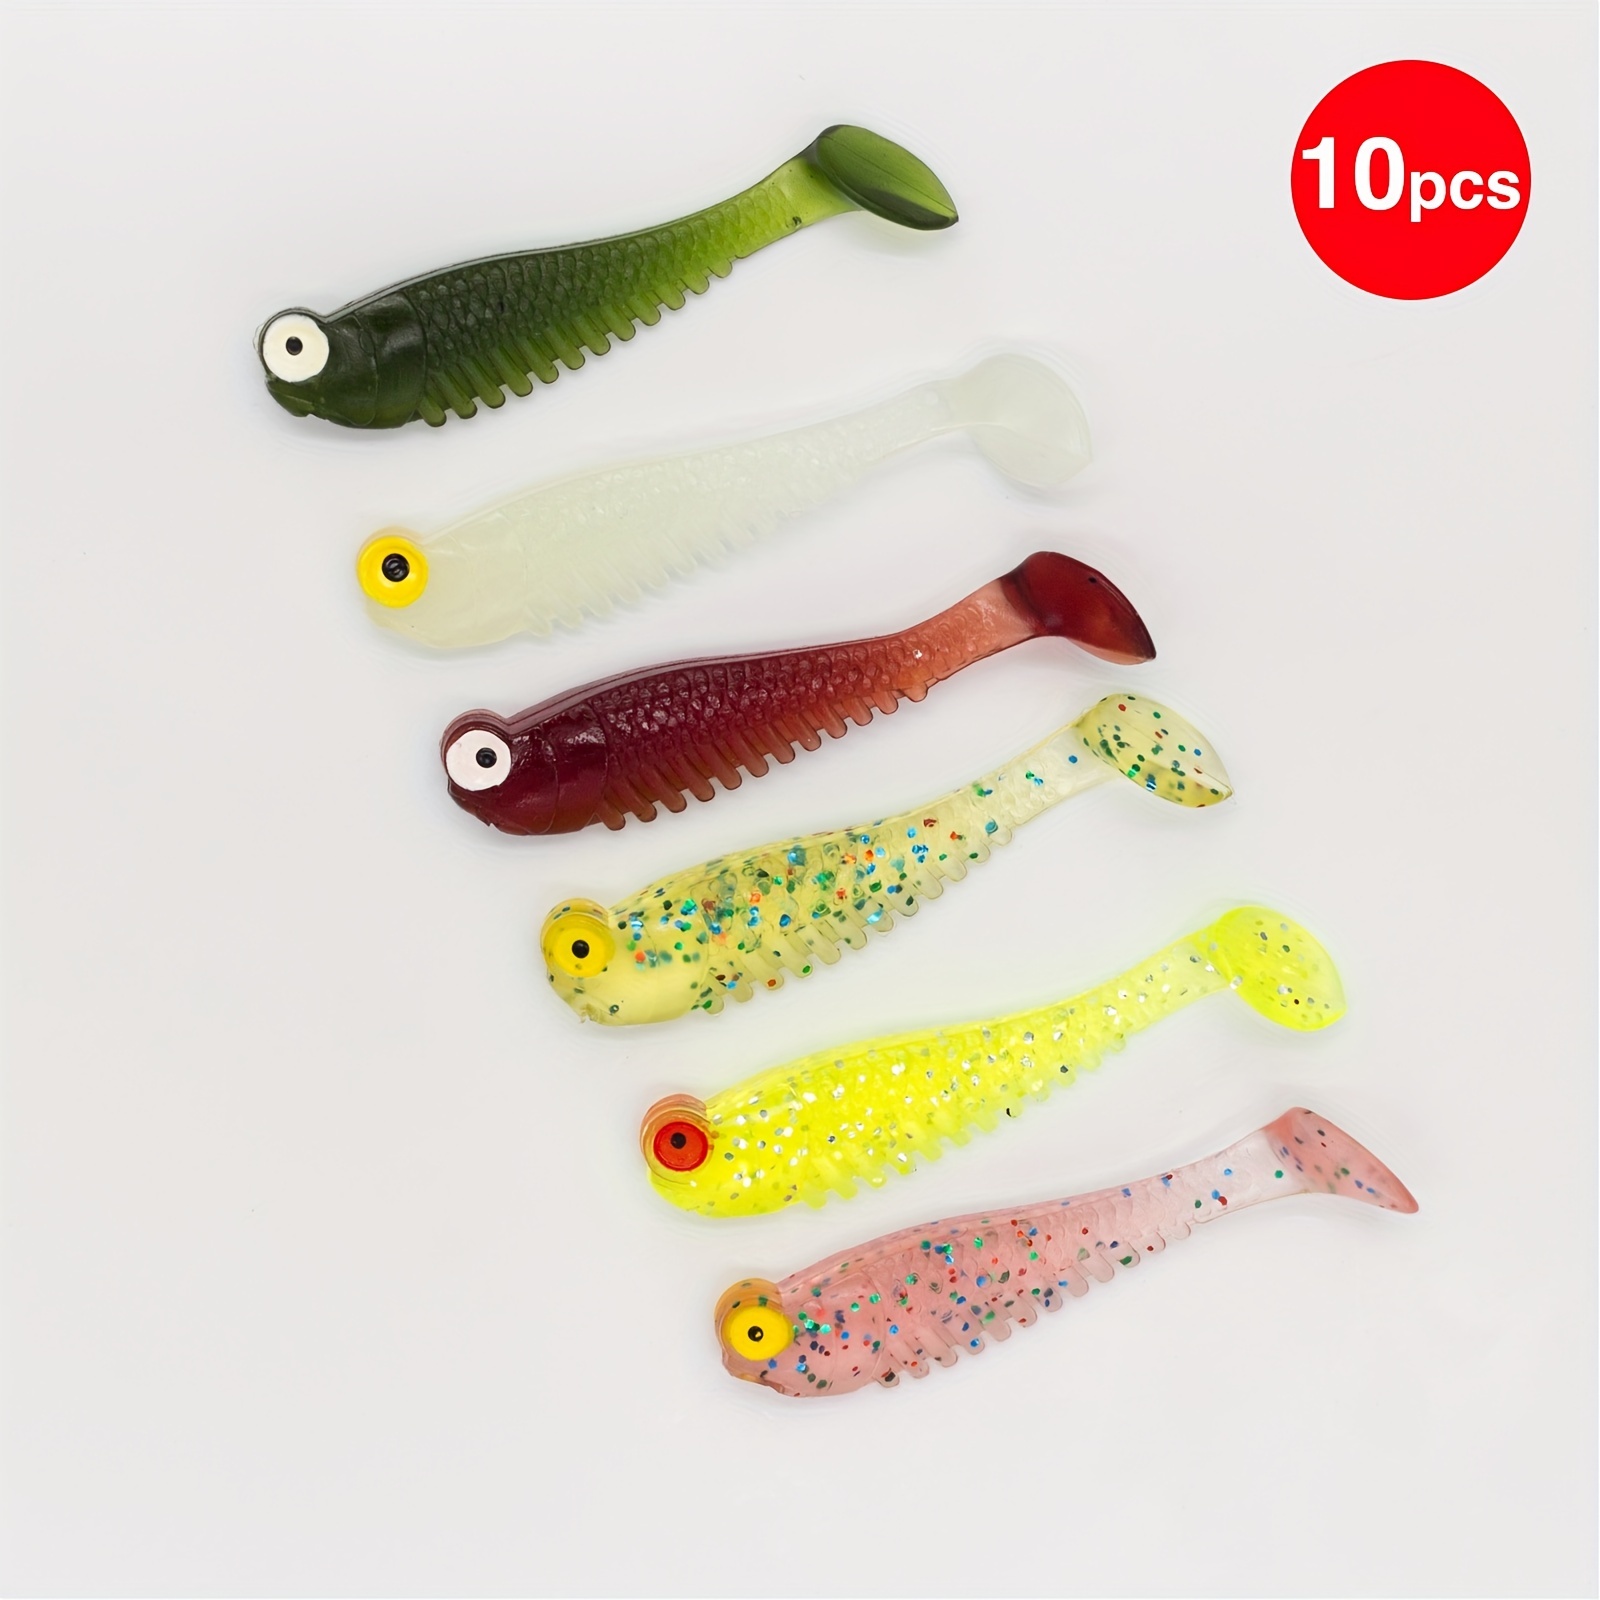 Soft Swimbait Fishing Lures Soft Baits For Bass Trout Freshwater And  Saltwater